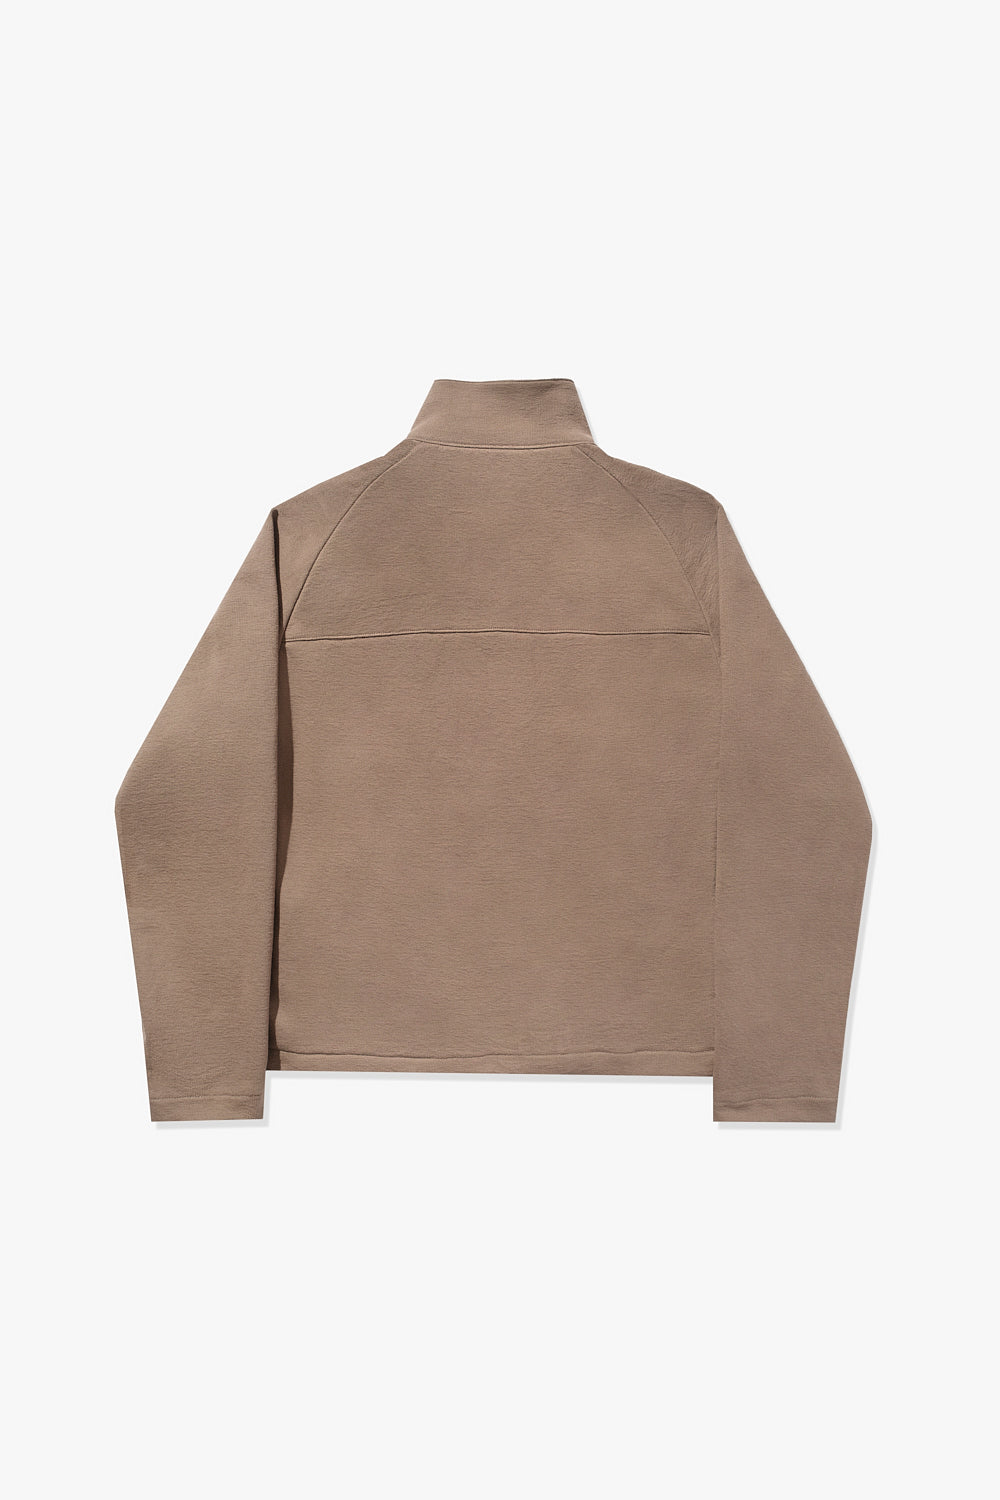 Lady White AW23 Textured Track Jacket (Deep Cement)